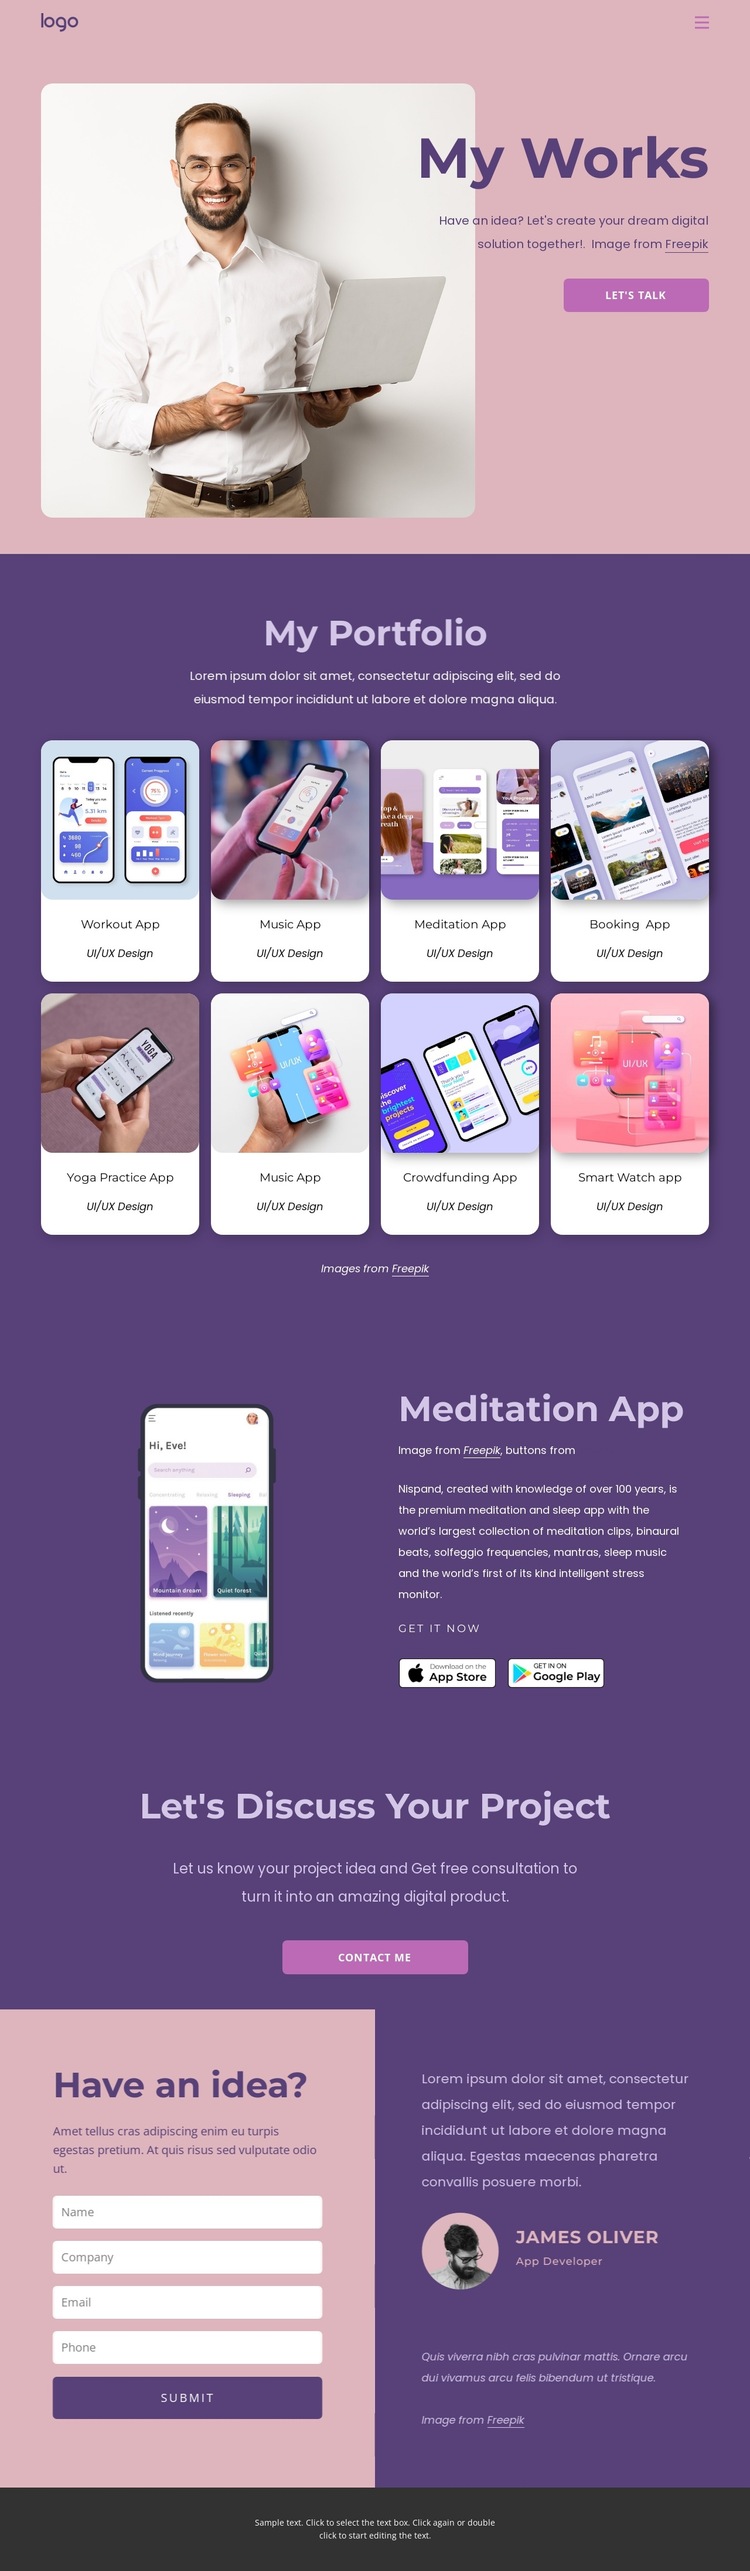 Custom iOS and Android apps for your business HTML5 Template